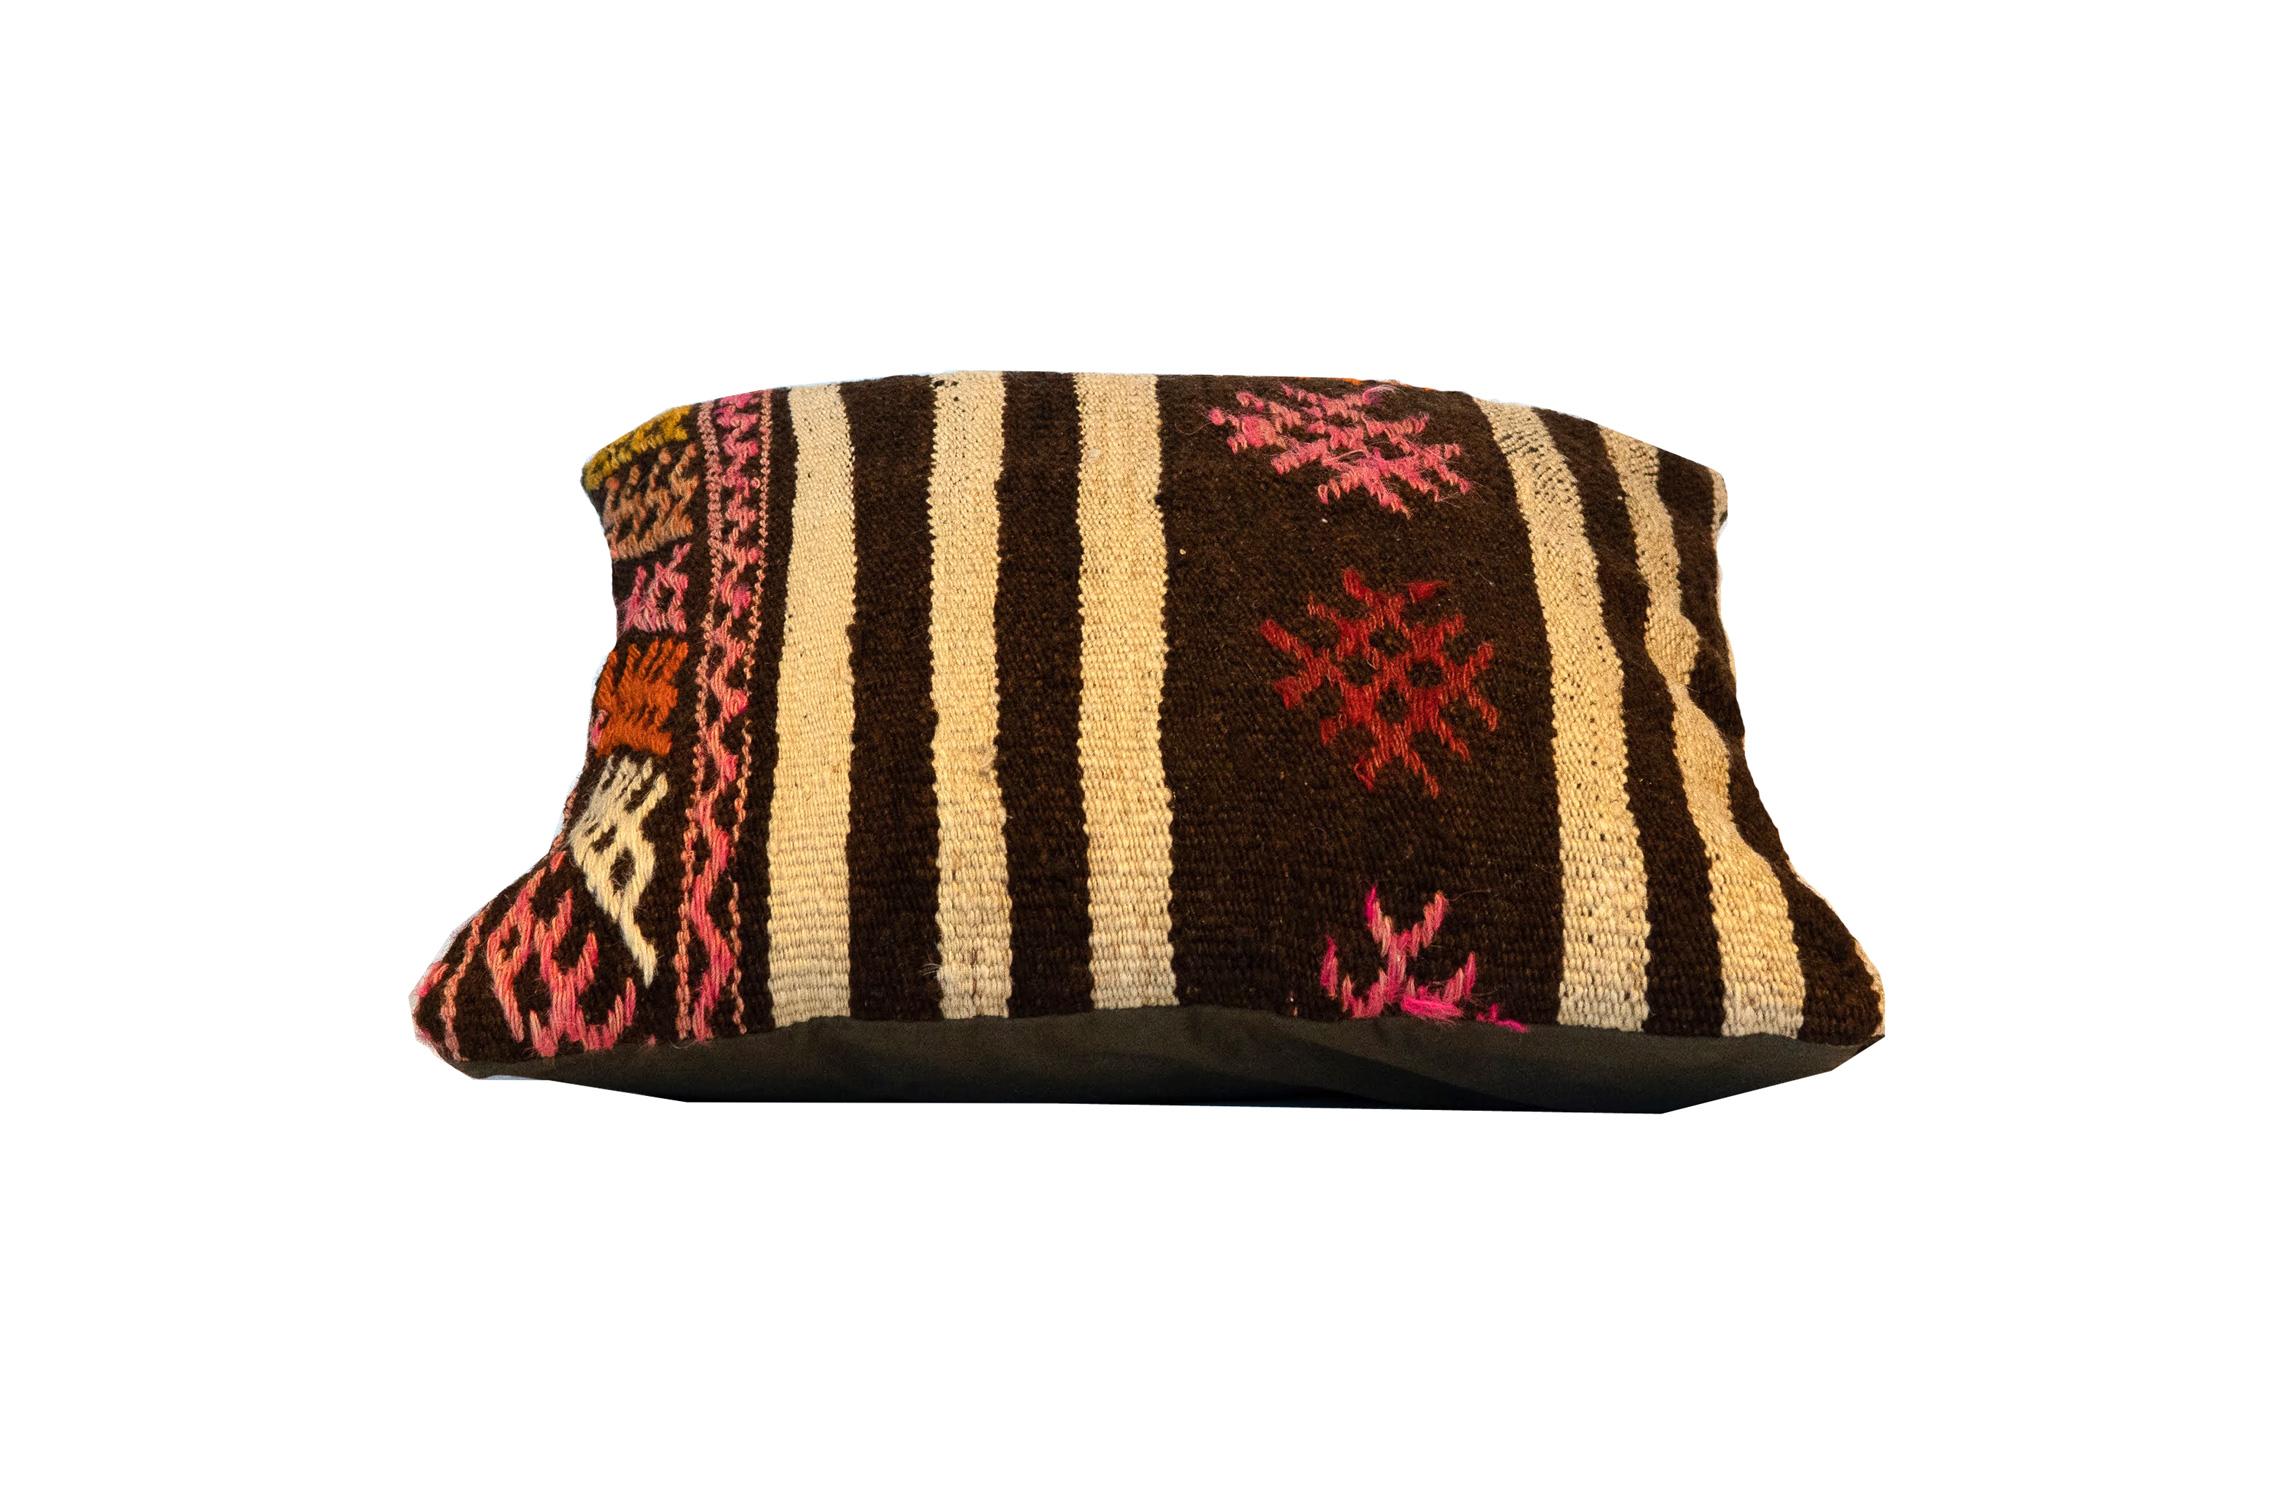 This beautiful handmade cushion has been handwoven with a fantastic, simple, yet effective design mixing simply striped and geometric motifs and patterns. The subtle black and cream stripe contrasts beautifully with the geometric details of pink,